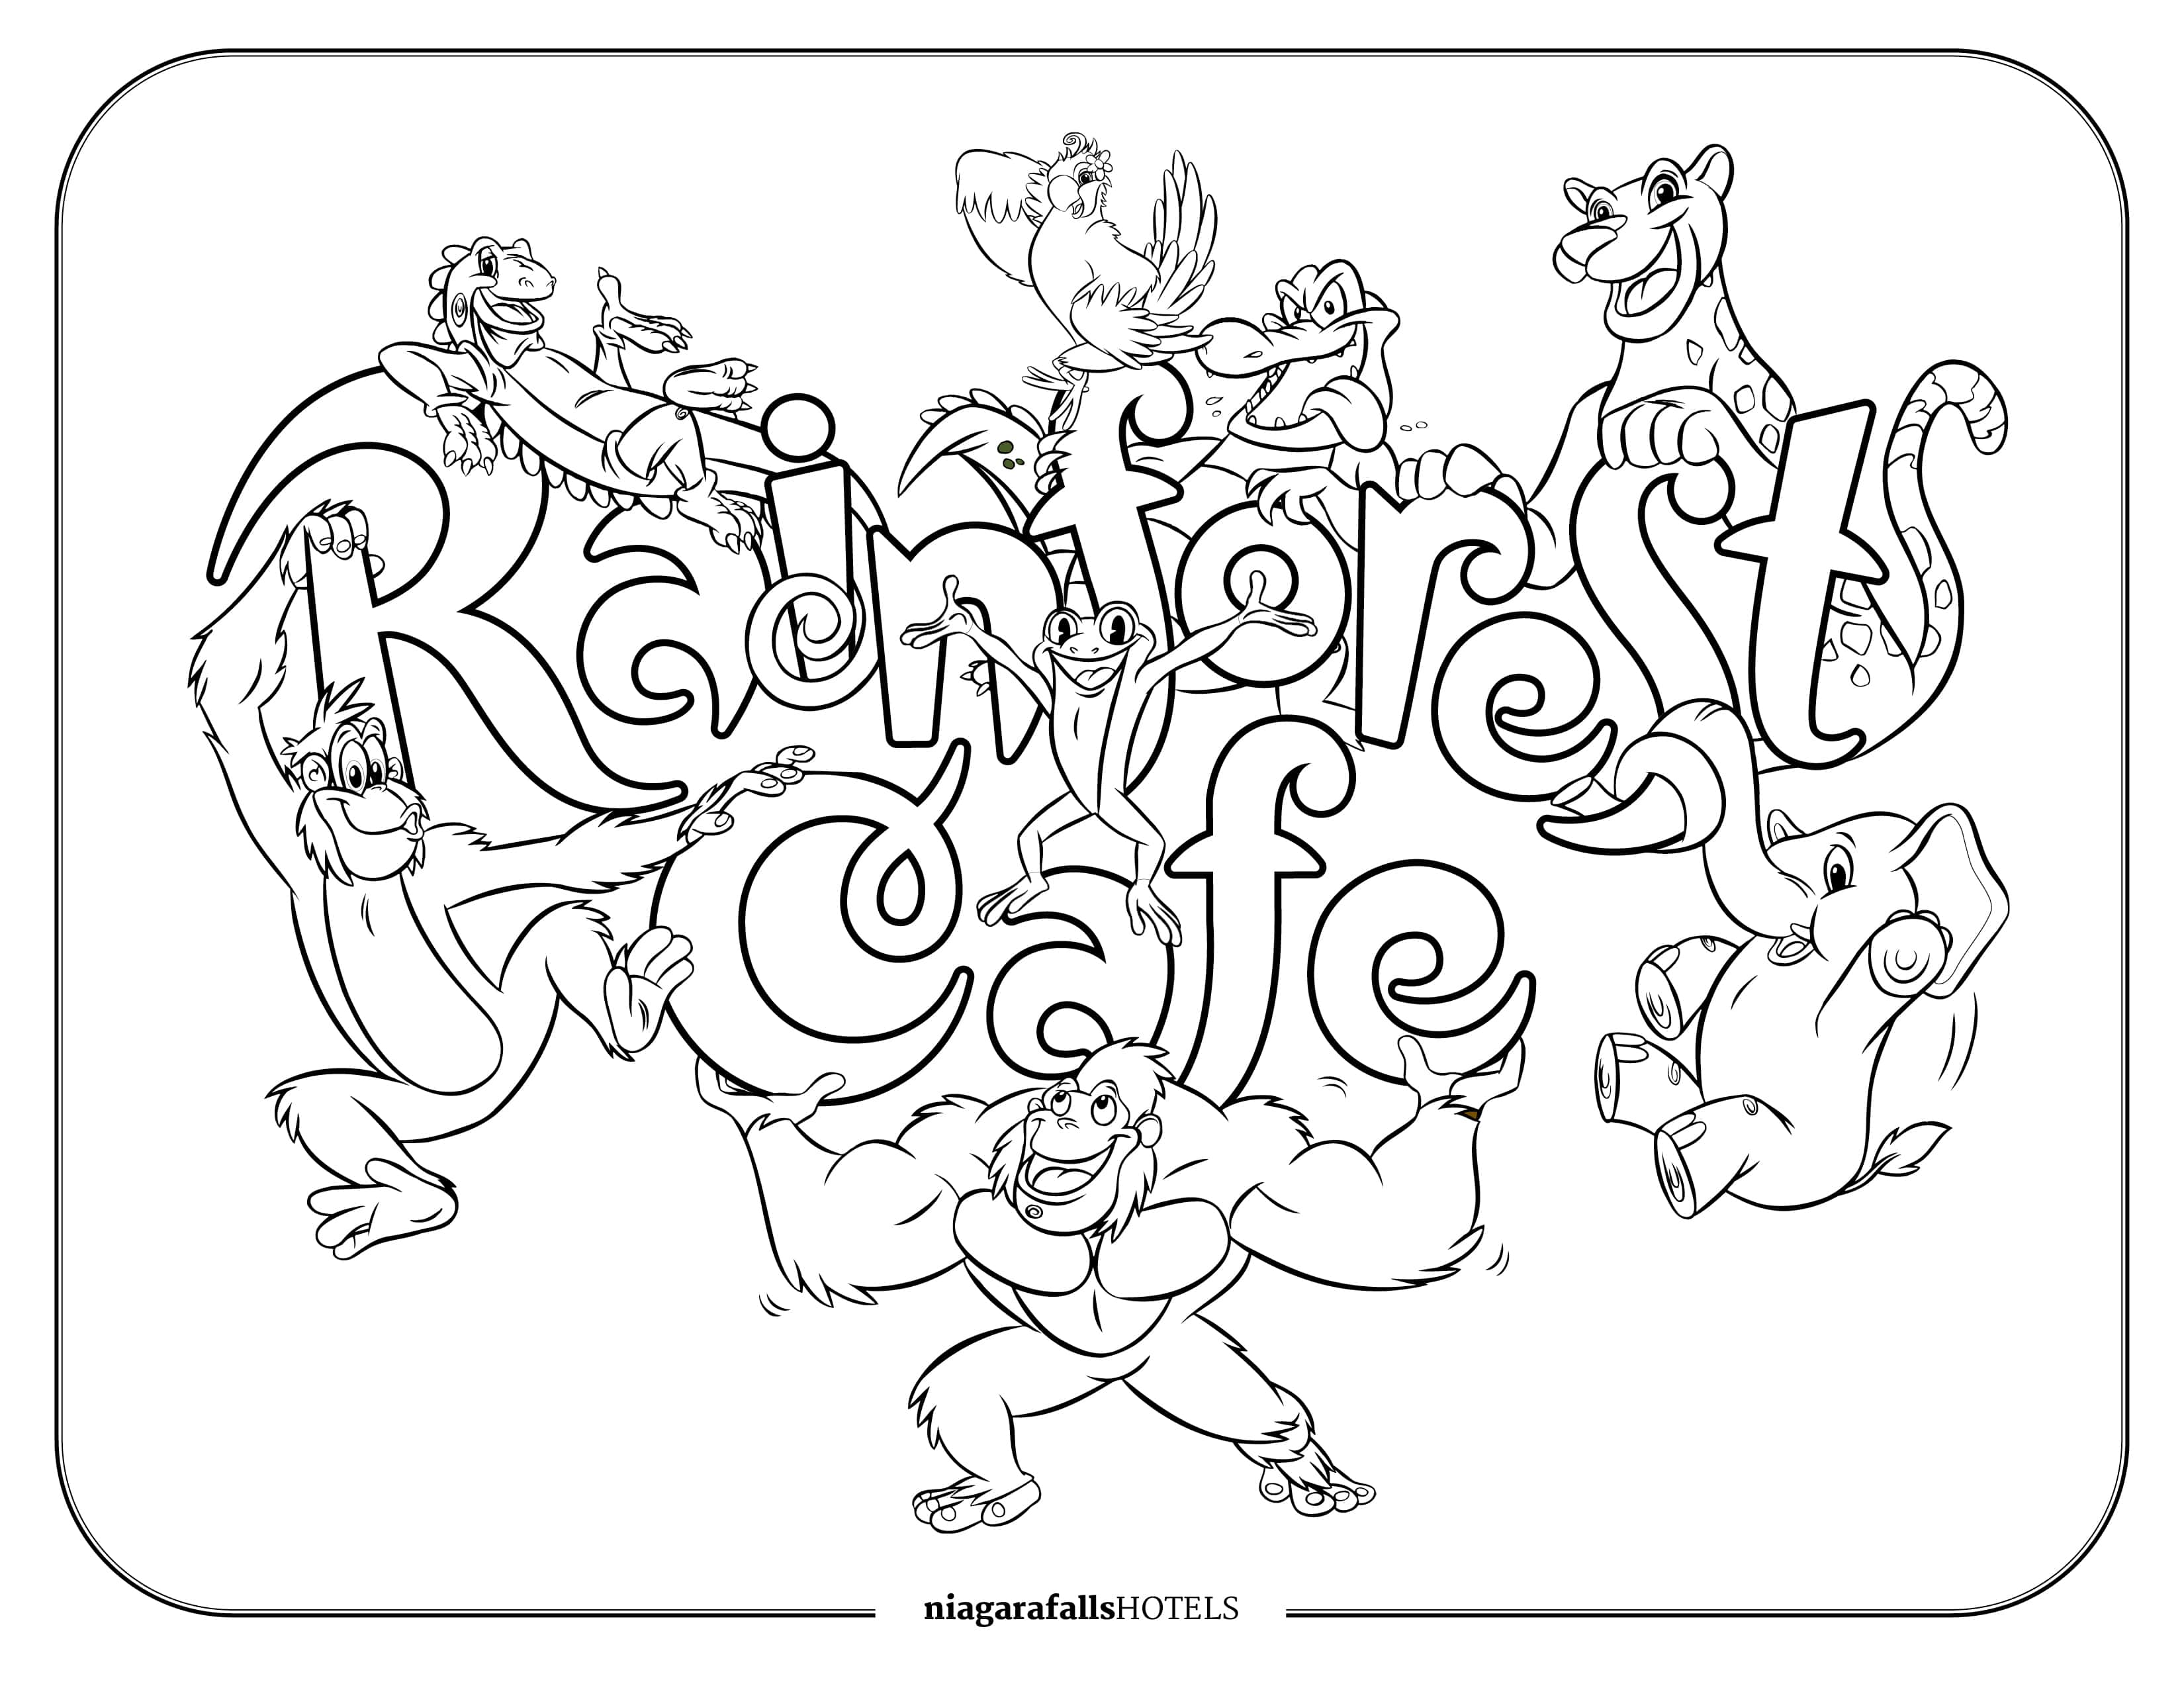 Rainforest Cafe Colouring Page